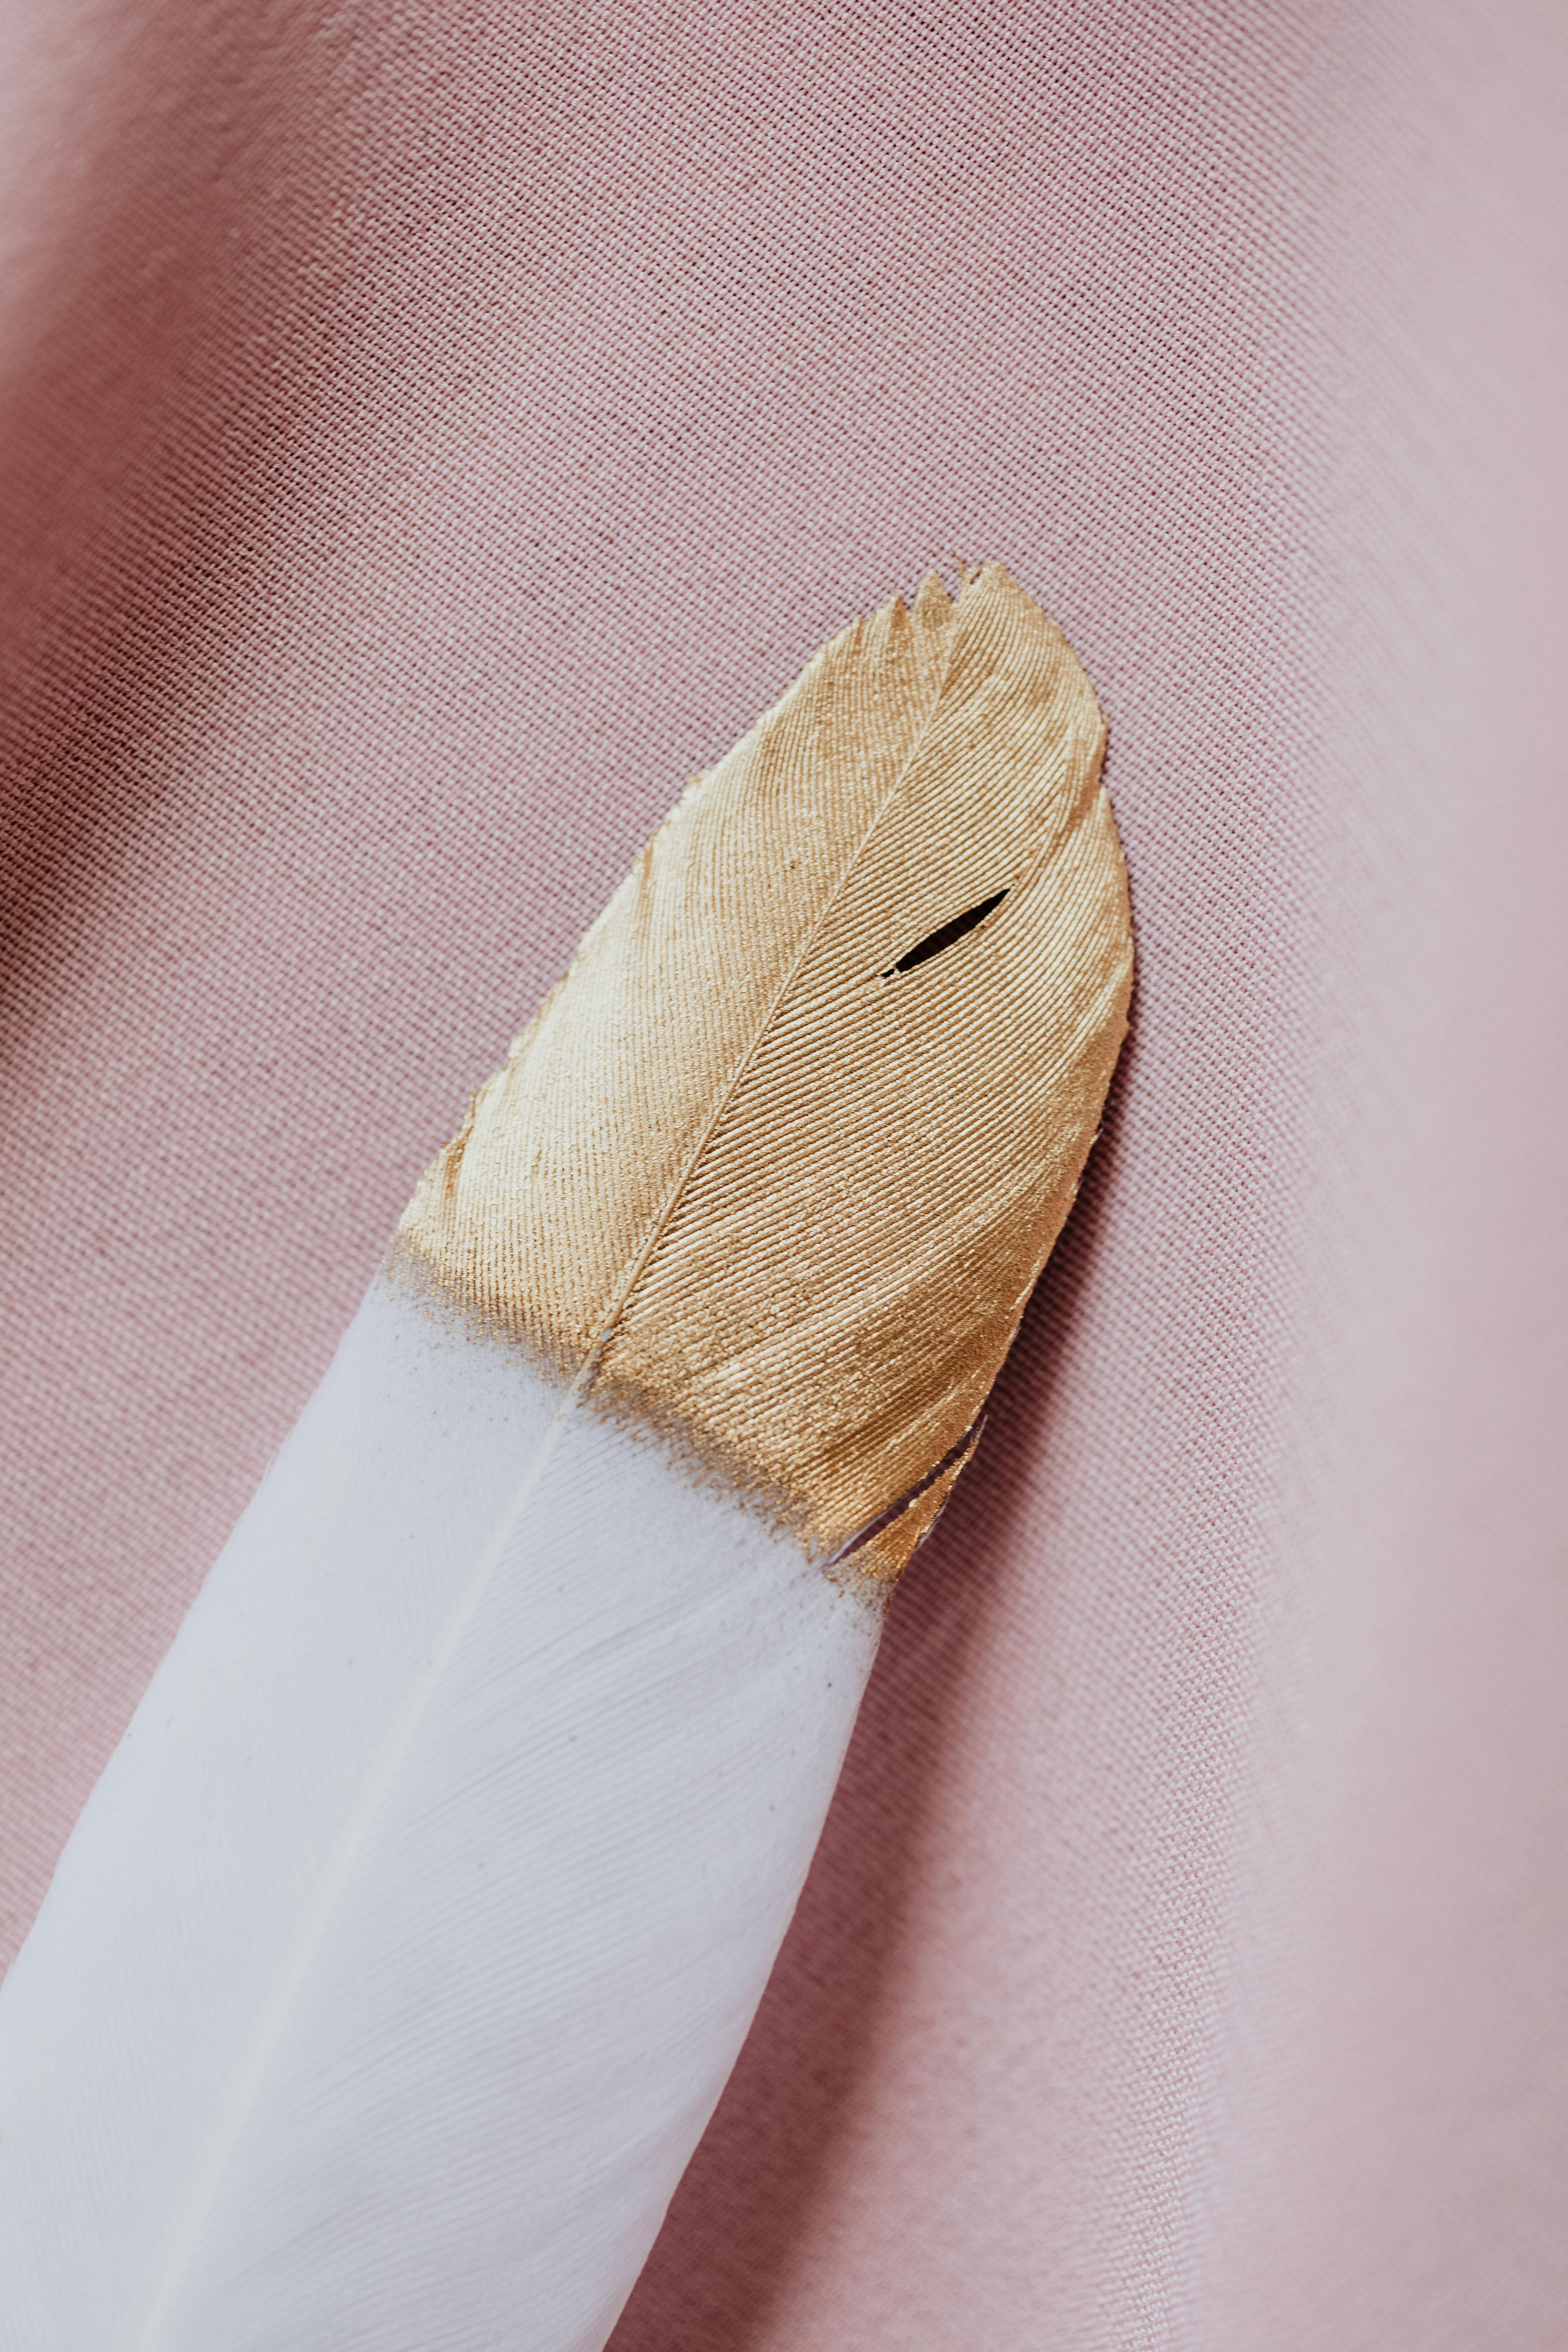 a close up shot of a feather with a gold tip